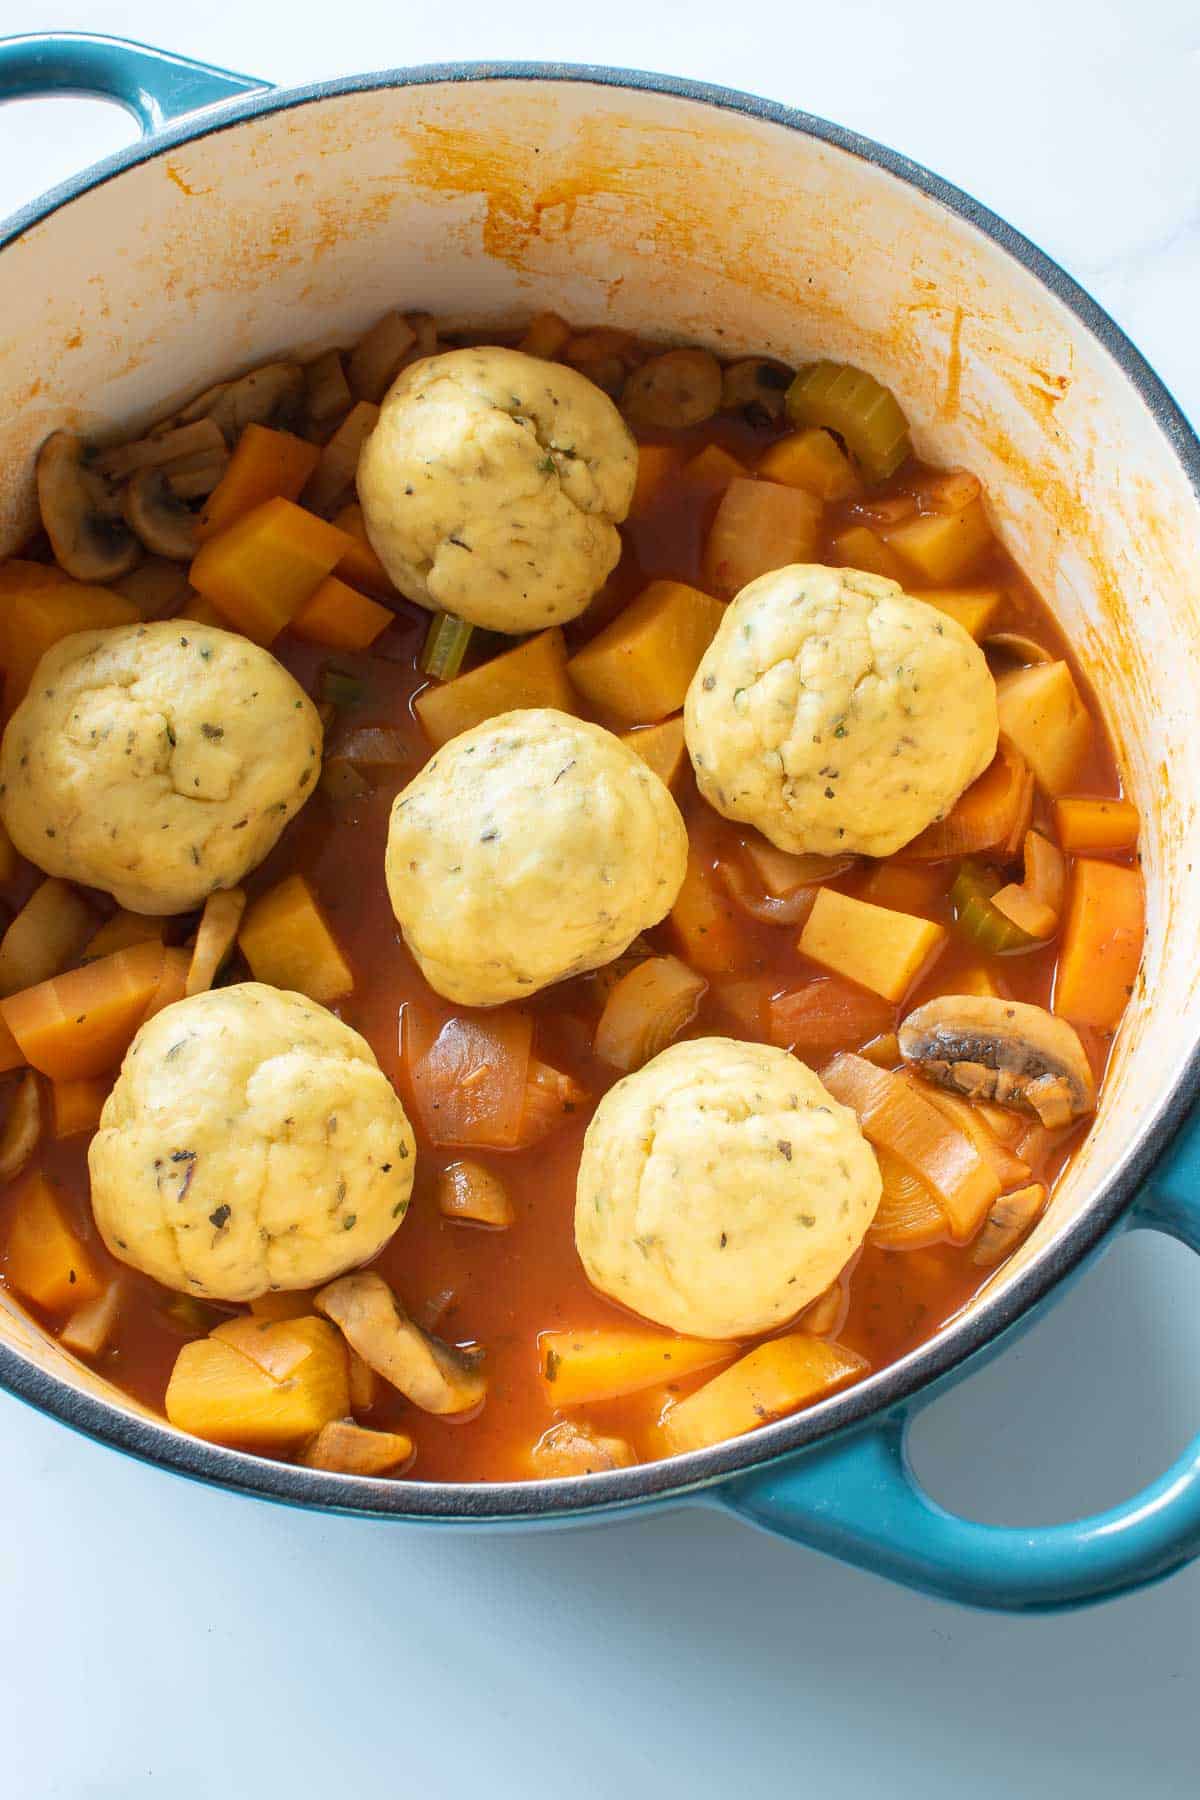 A pot of stew with uncooked dumplings.